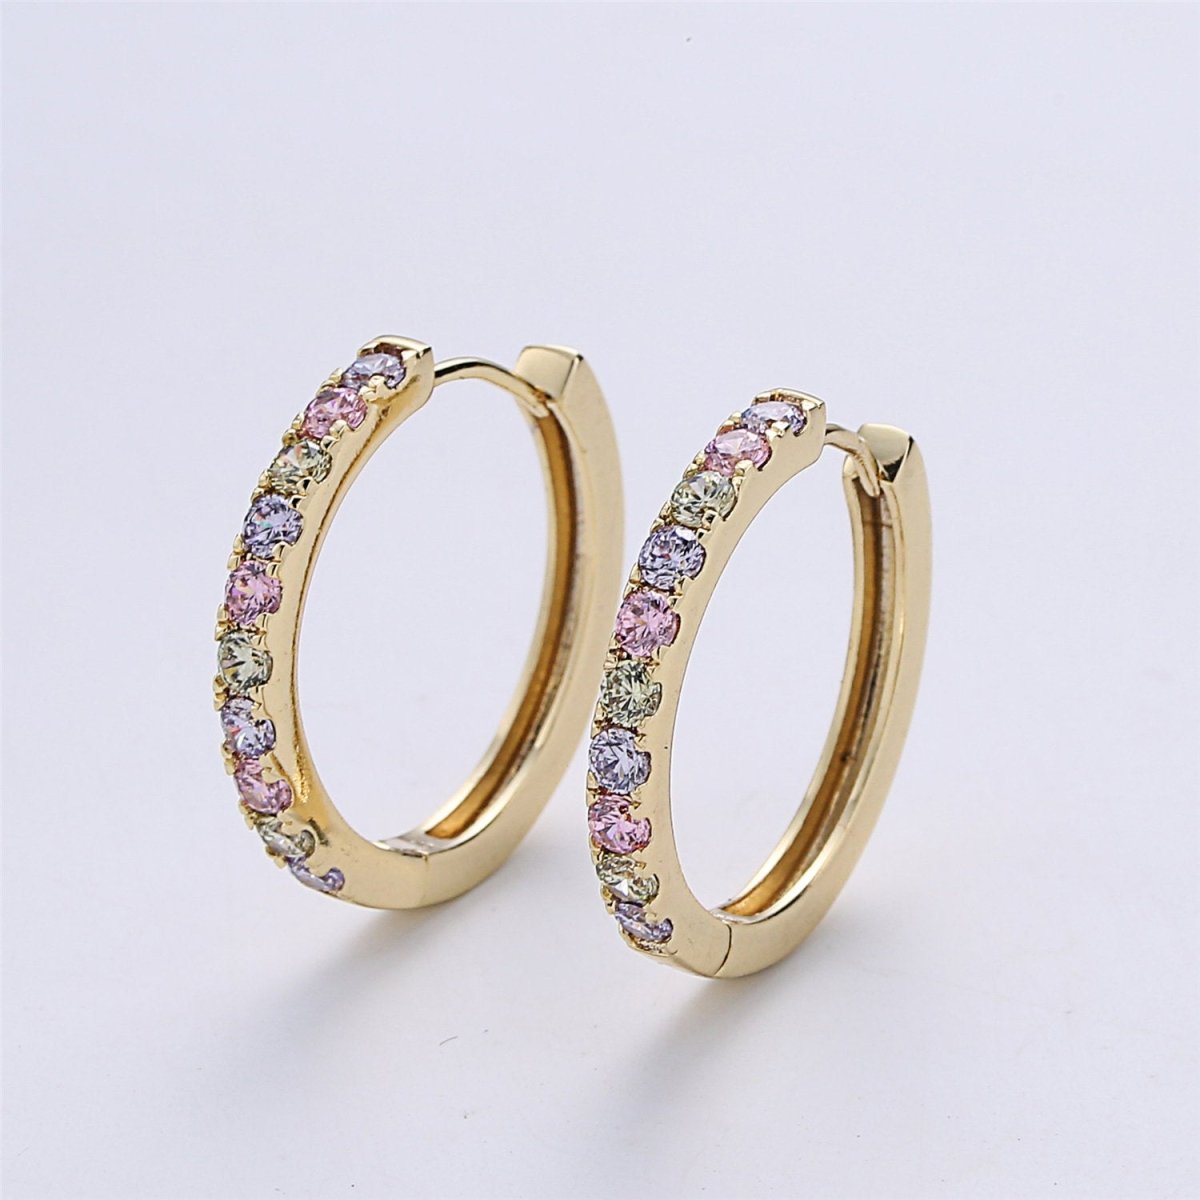 Dainty Gold Huggie Earring- Multi Color Cubic Earring - Pink Blue CZ Earring - Gold Filled Earring - Minimalist Jewelry Supply Component Q-003 - DLUXCA